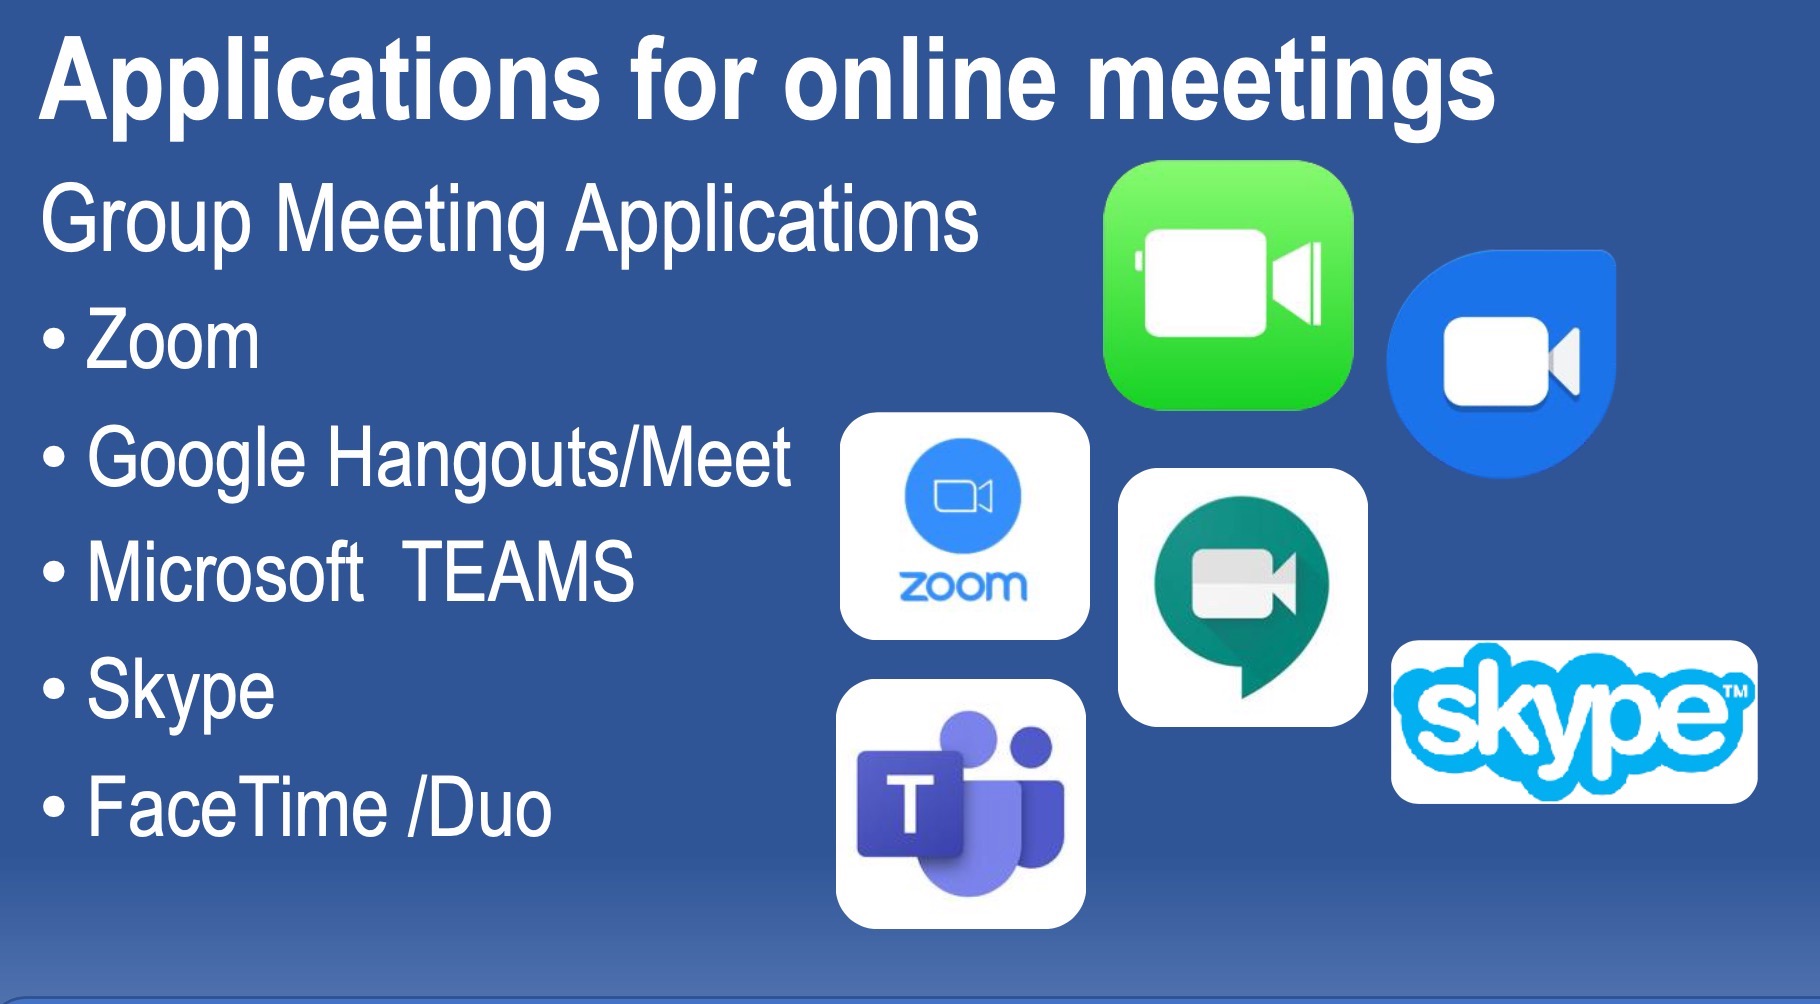 Applications for Online Meetings, and a variety of options with their icons